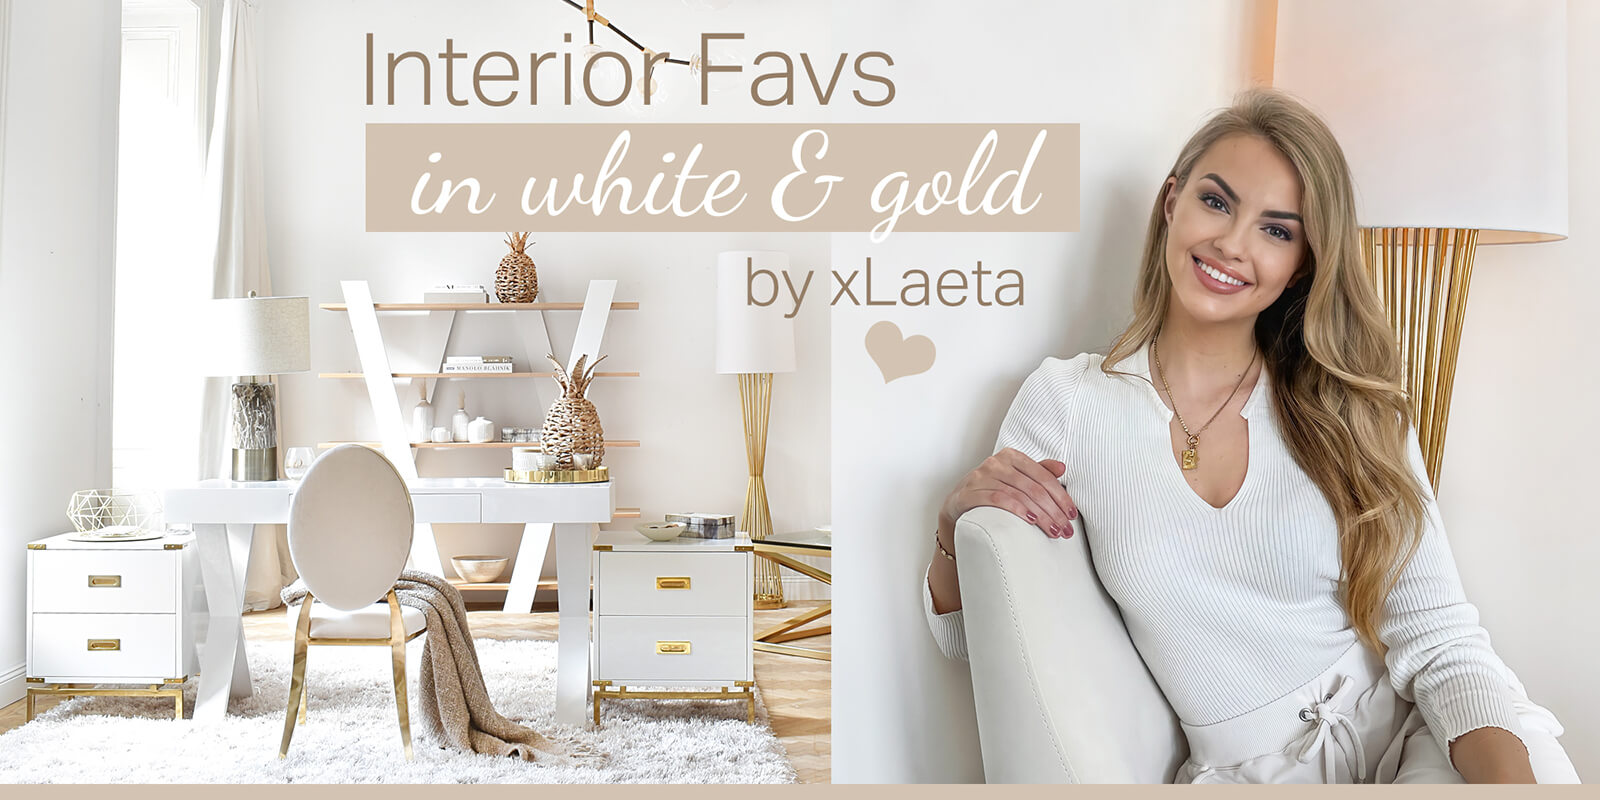 New Look: xLaeta's Interior Favs in white & gold